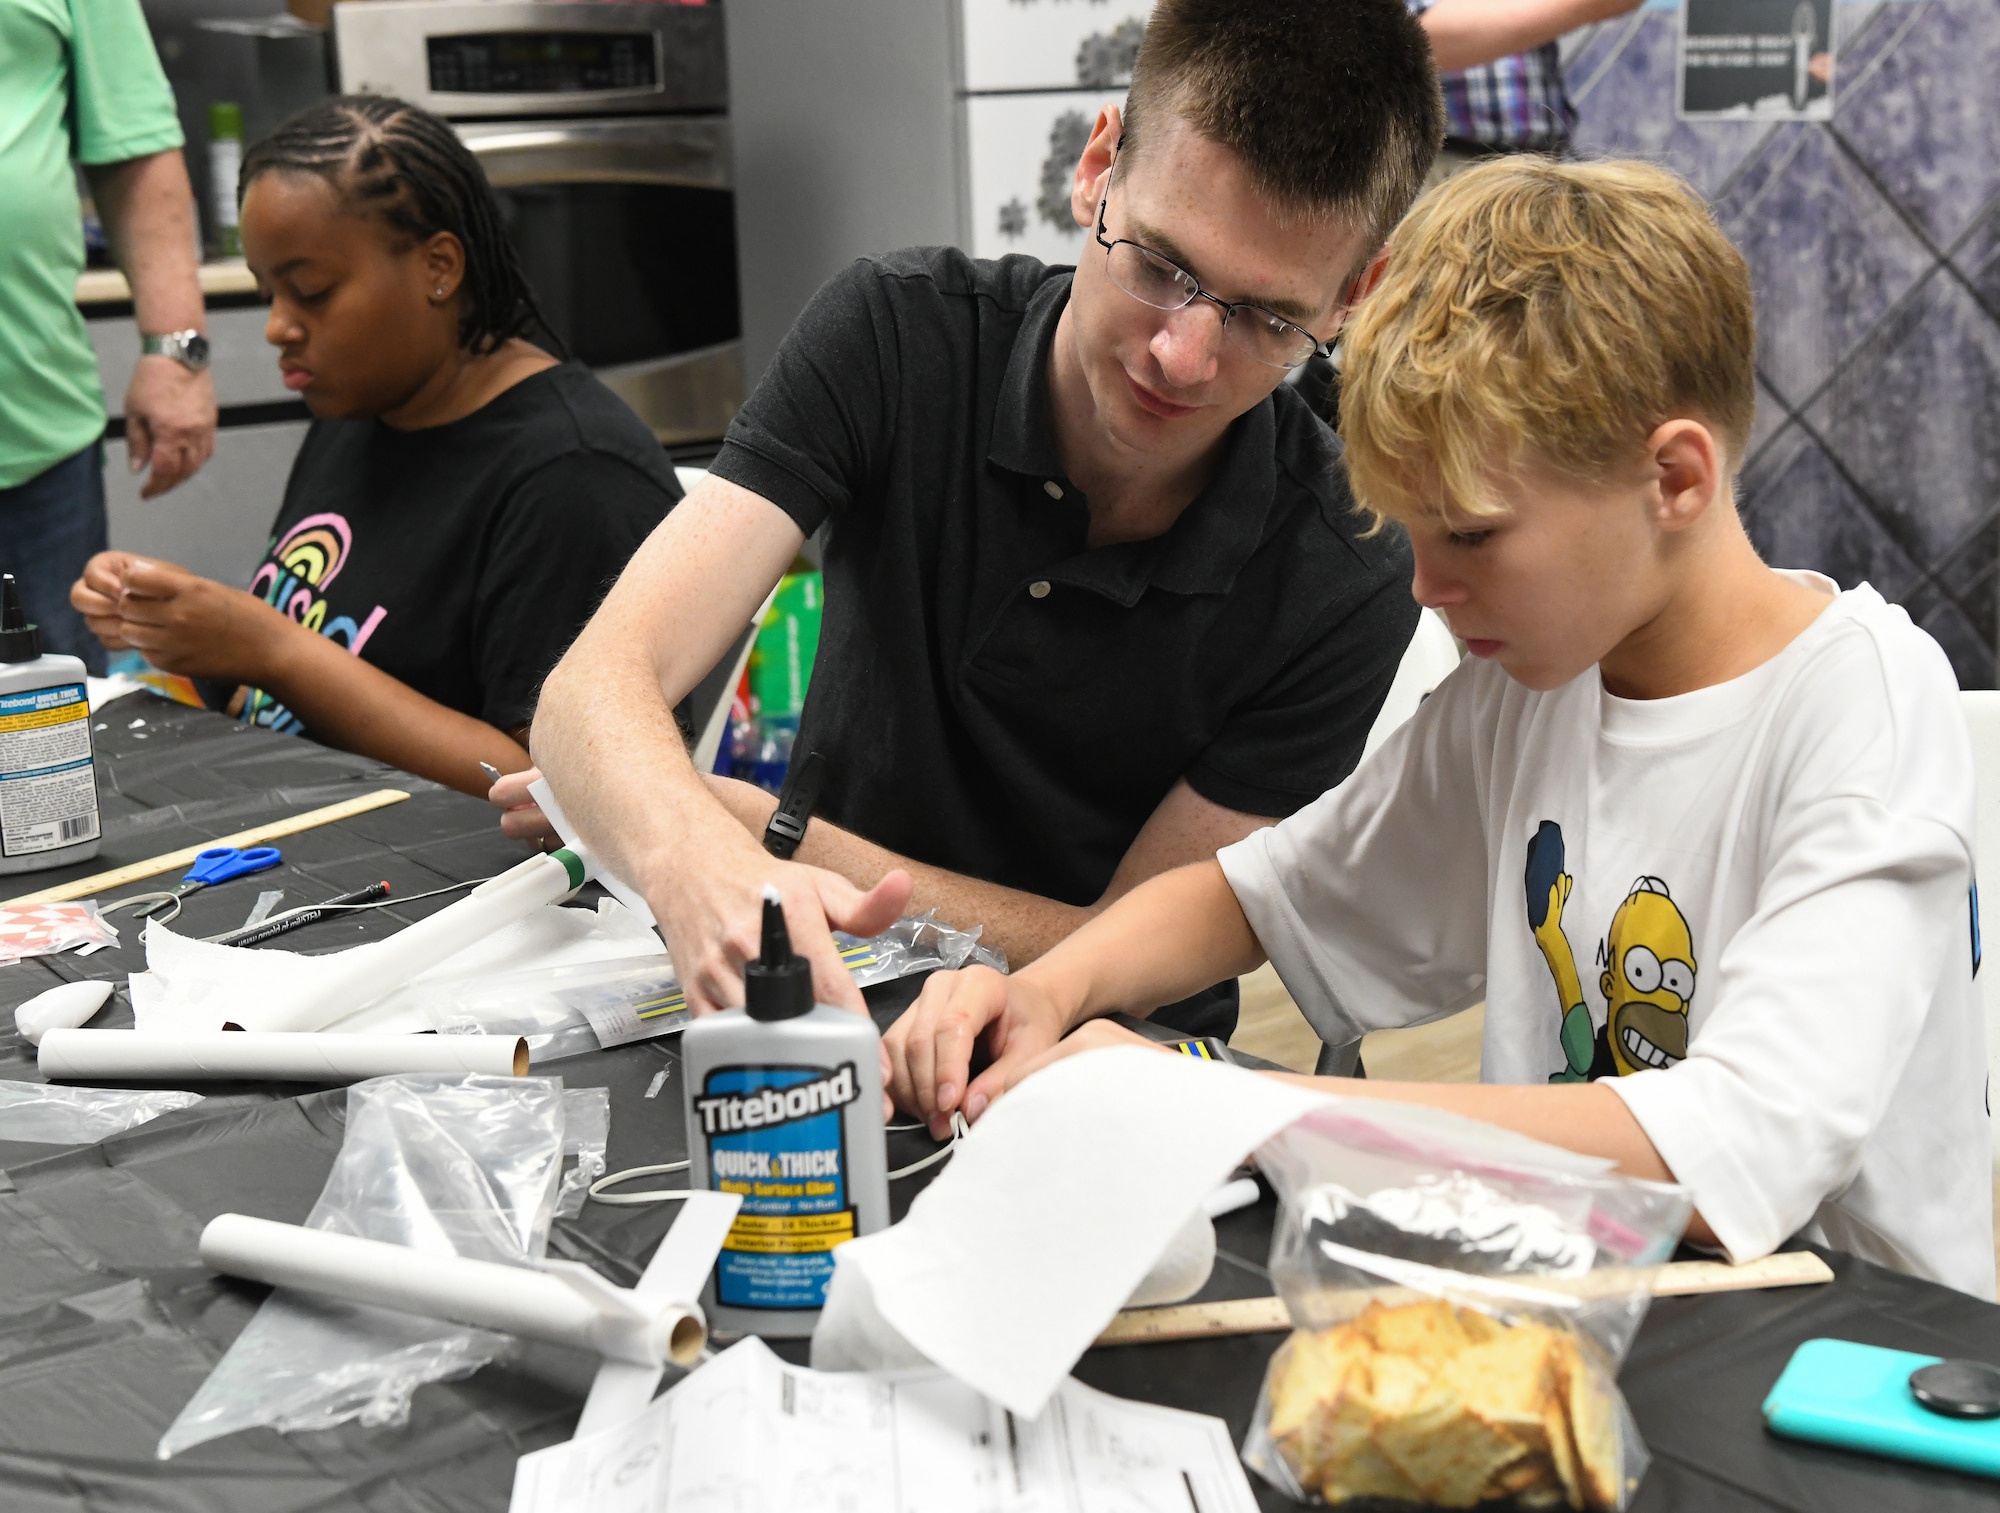 2nd Lt. Benjamin West, with the 718th Test Squadron, helps Gavin Campbell, 11, with the parachute assembly for his model rocket during the Reach for the Stars event at the Hands-On Science Center in Tullahoma, Tenn., June 22, 2023. Reach for the Stars is a national rocket launch competition. The 718 TS is part of the 804th Test Group, Arnold Engineering Development Complex, and is headquartered at Arnold Air Force Base, Tenn. (U.S. Air Force photo by Jill Pickett)